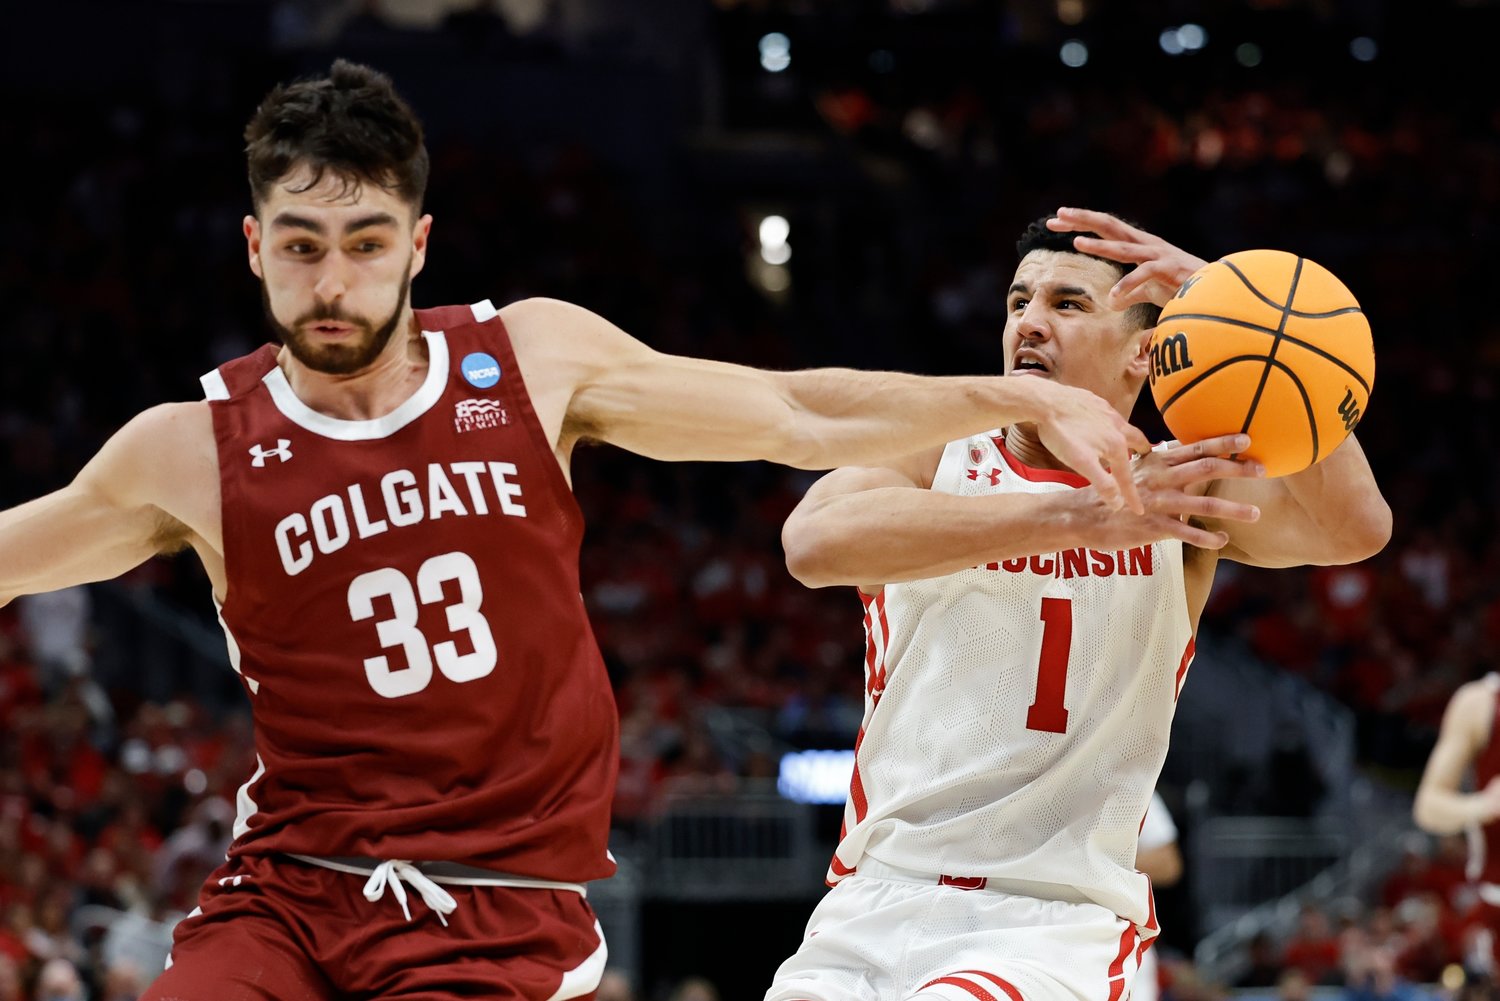 UP FOR GRABS — Wisconsin's Johnny Davis and Colgate's Oliver Lynch-Daniels go after a loose ball during the first half of a first-round NCAA men's basketball tournament game on Friday night in Milwaukee.